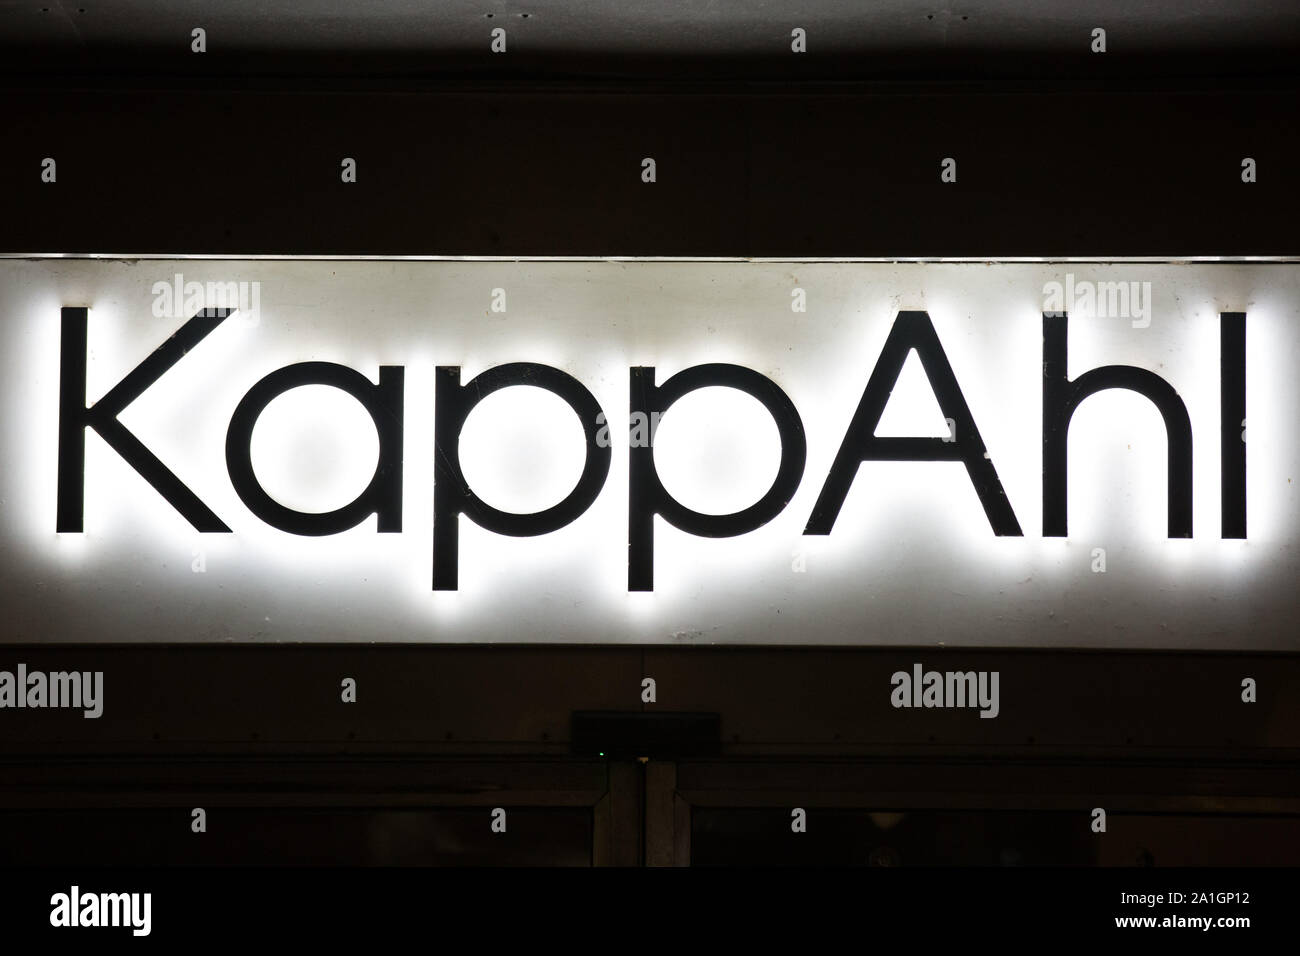 Kappahl High Resolution Stock Photography and Images - Alamy